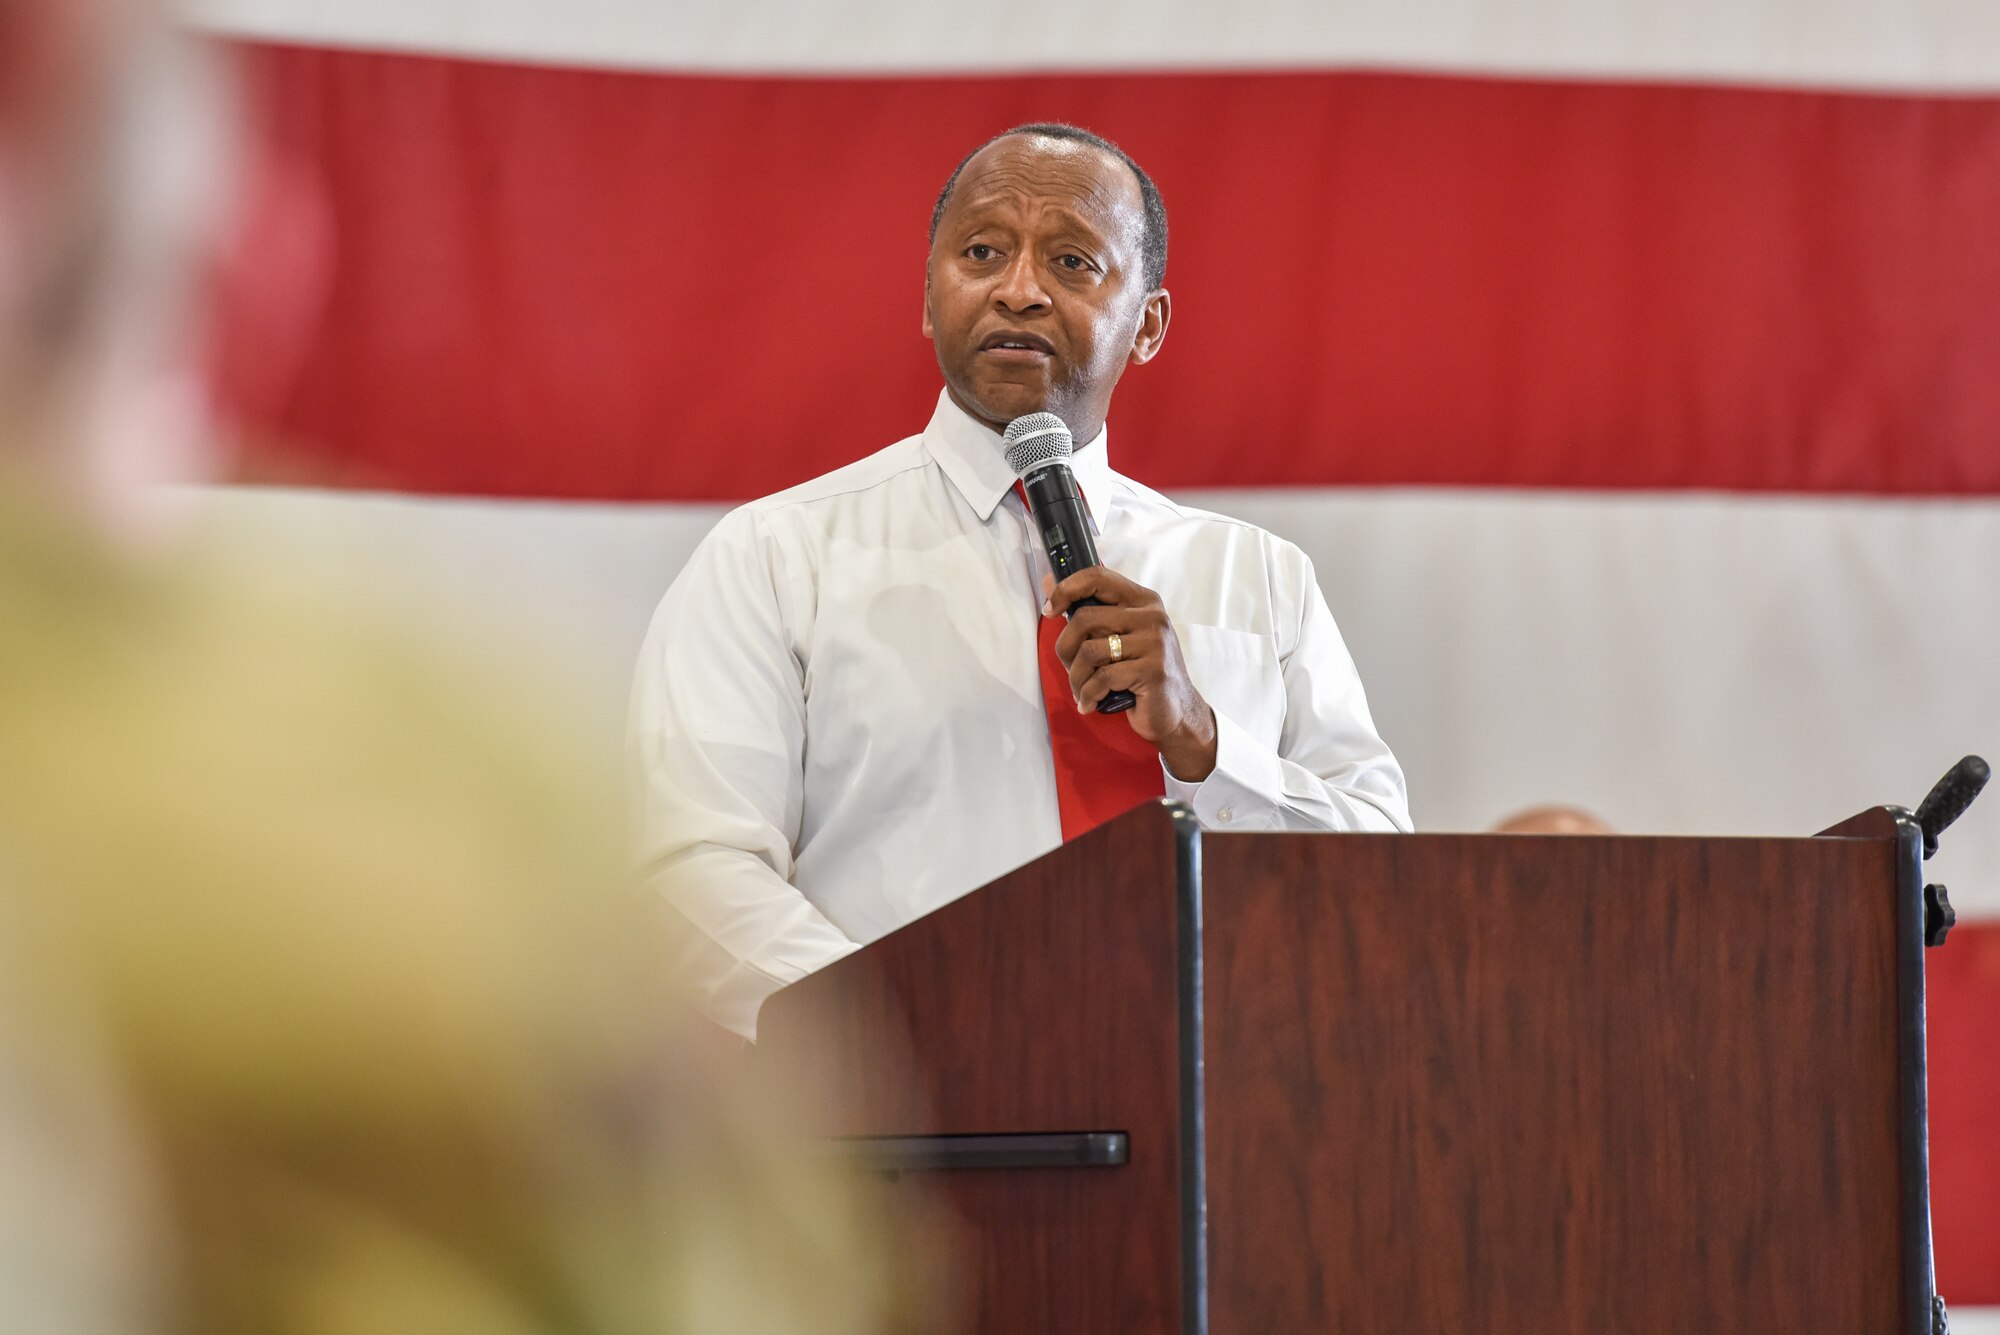 John Pope, retired U.S. Air Force Chief Master Sgt. and Galilee Baptist Church pastor, delivers a speech during the Juneteenth commemoration ceremony at Goodfellow Air Force Base, Texas, June 16, 2022. During the event, Pope spoke about the importance of Juneteenth and his experiences as an African American. (U.S. Air Force photo by Staff Sgt. Jermaine Ayers)